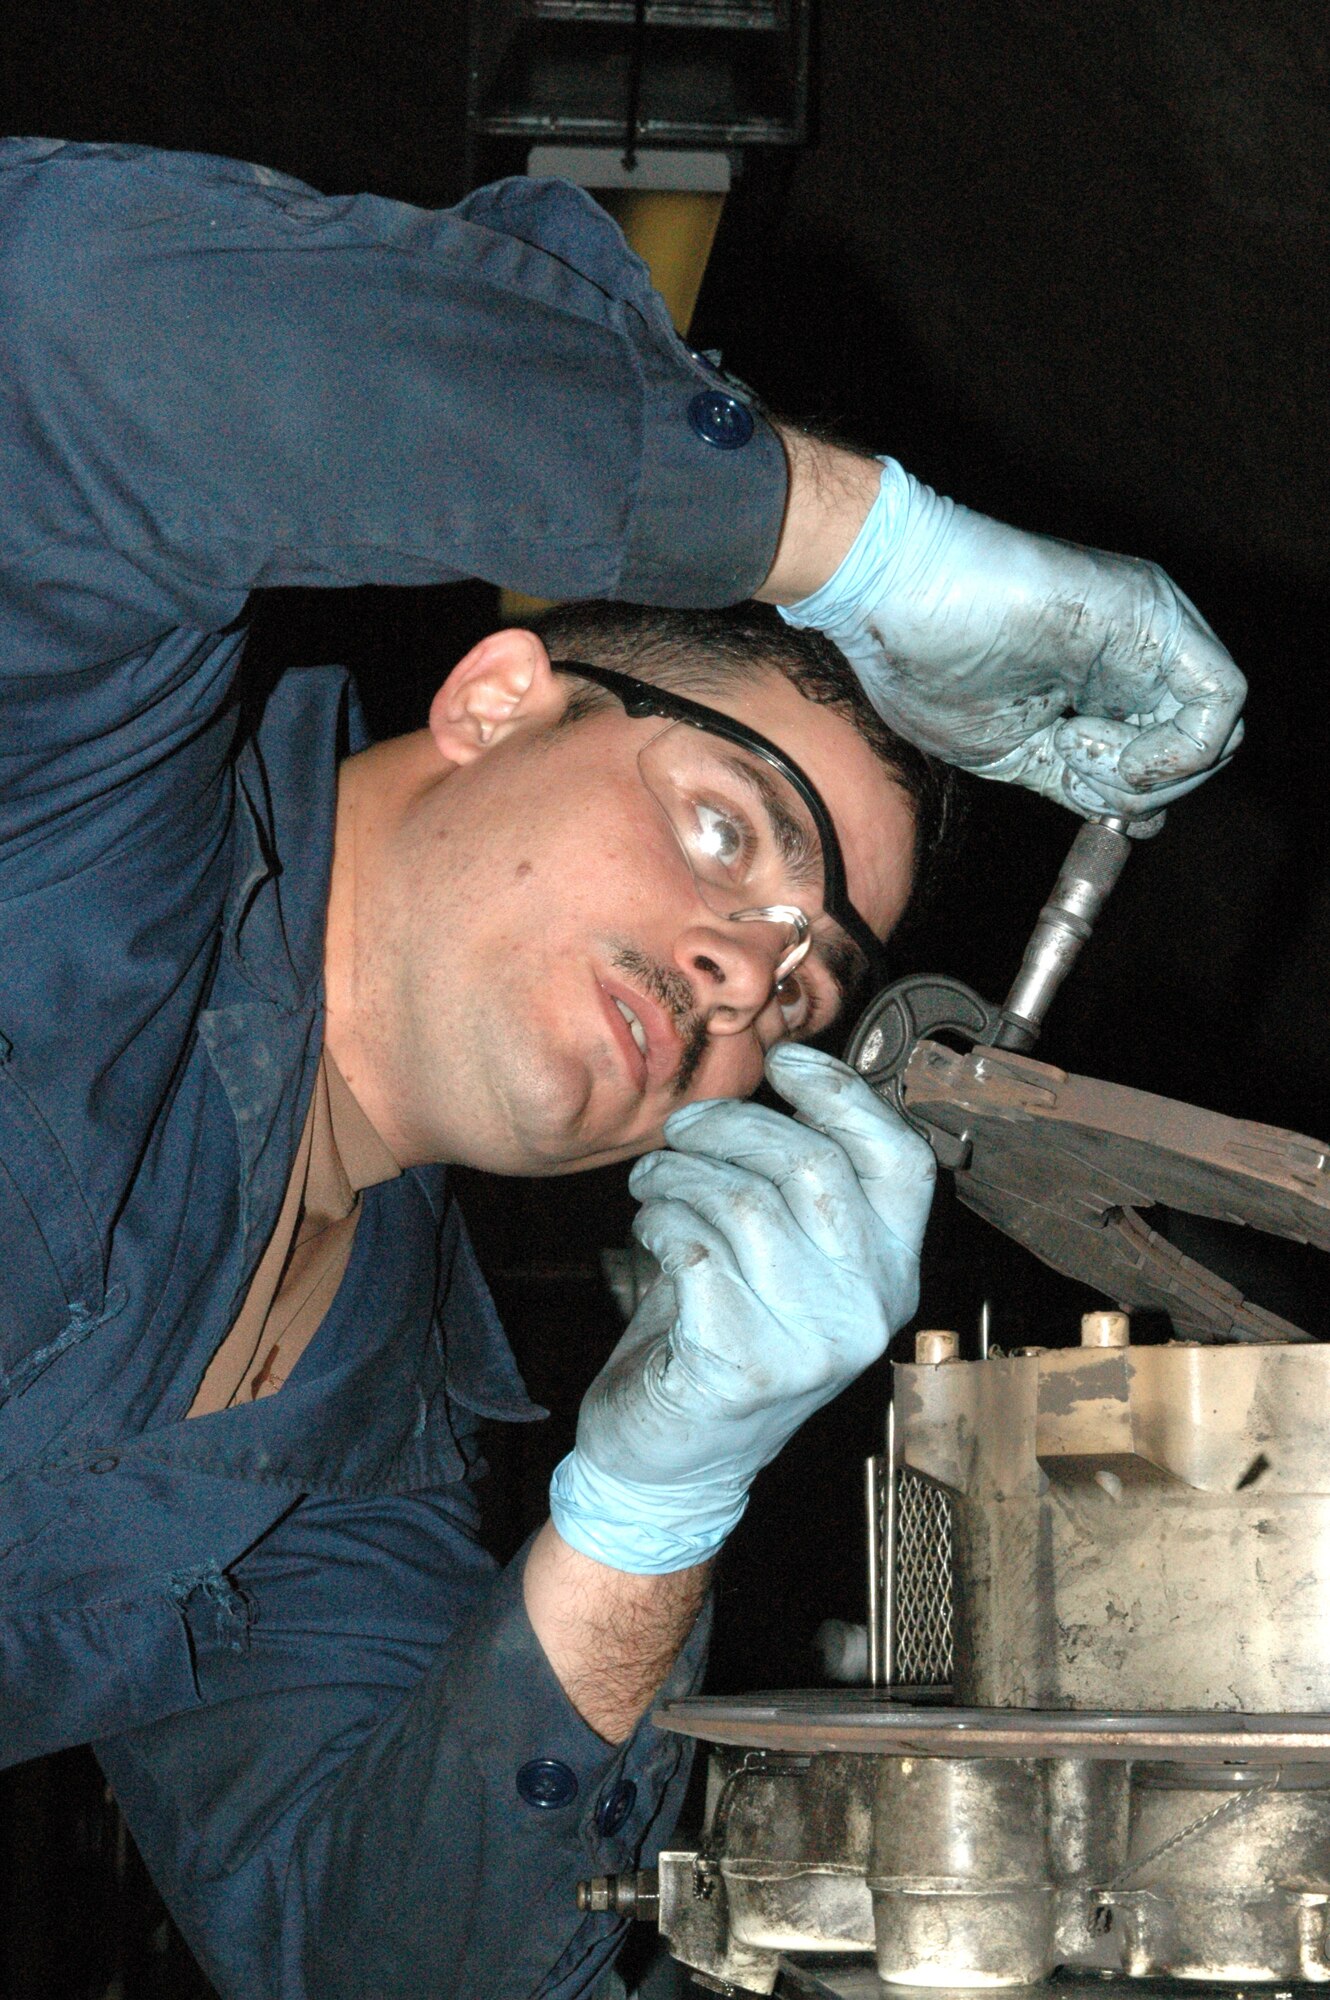 SOUTHWEST ASIA -- Sergeant Crespo measures the thickness of a new brake puck on a KC-135 brake here. The CIRF makes it possible for the brakes on KC-135s to be repaired immediately, saving time and money that would be spent shipping the parts to and from the United States. (U.S. Air Force photo/Senior Airman Carolyn Viss)
